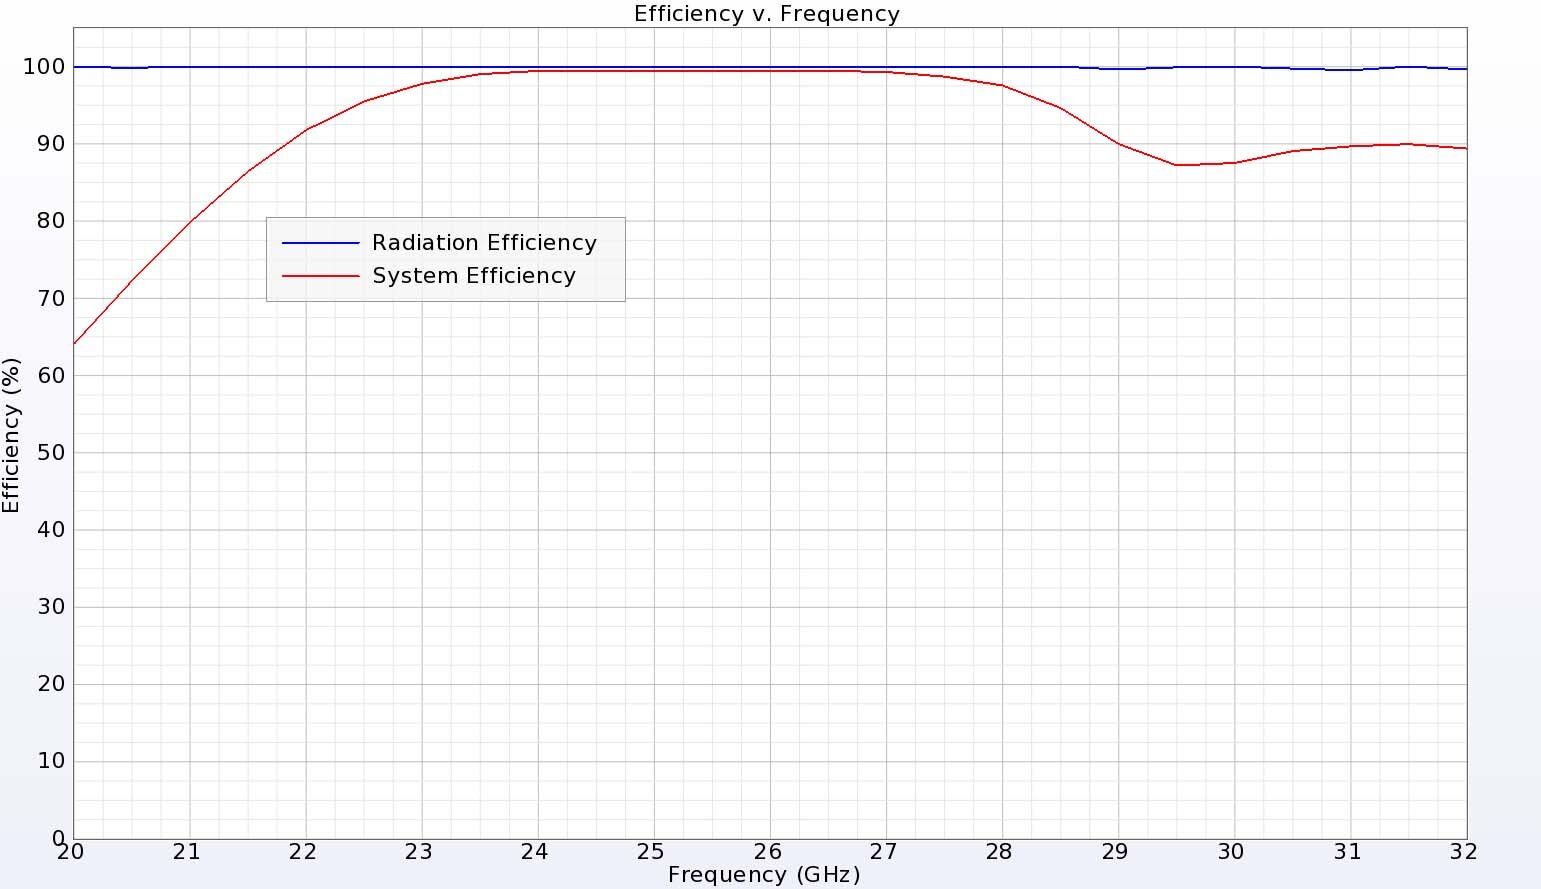 Figure 6:  The DRA has excellent efficiency above 90% for the entire frequency range.